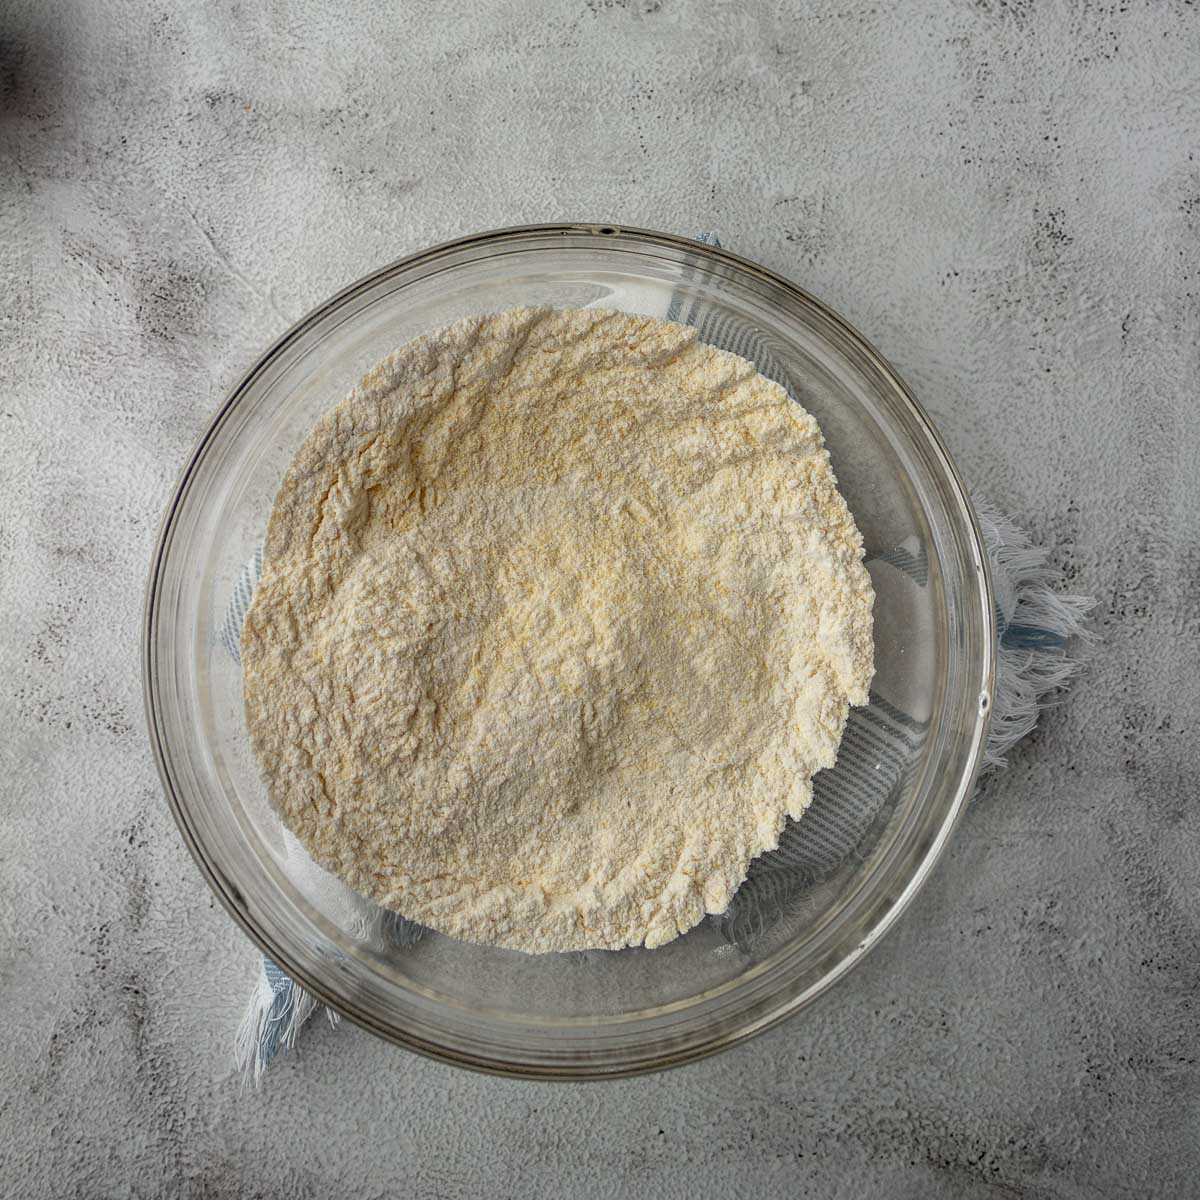 Mealie Bread - whisk together the dry ingredients